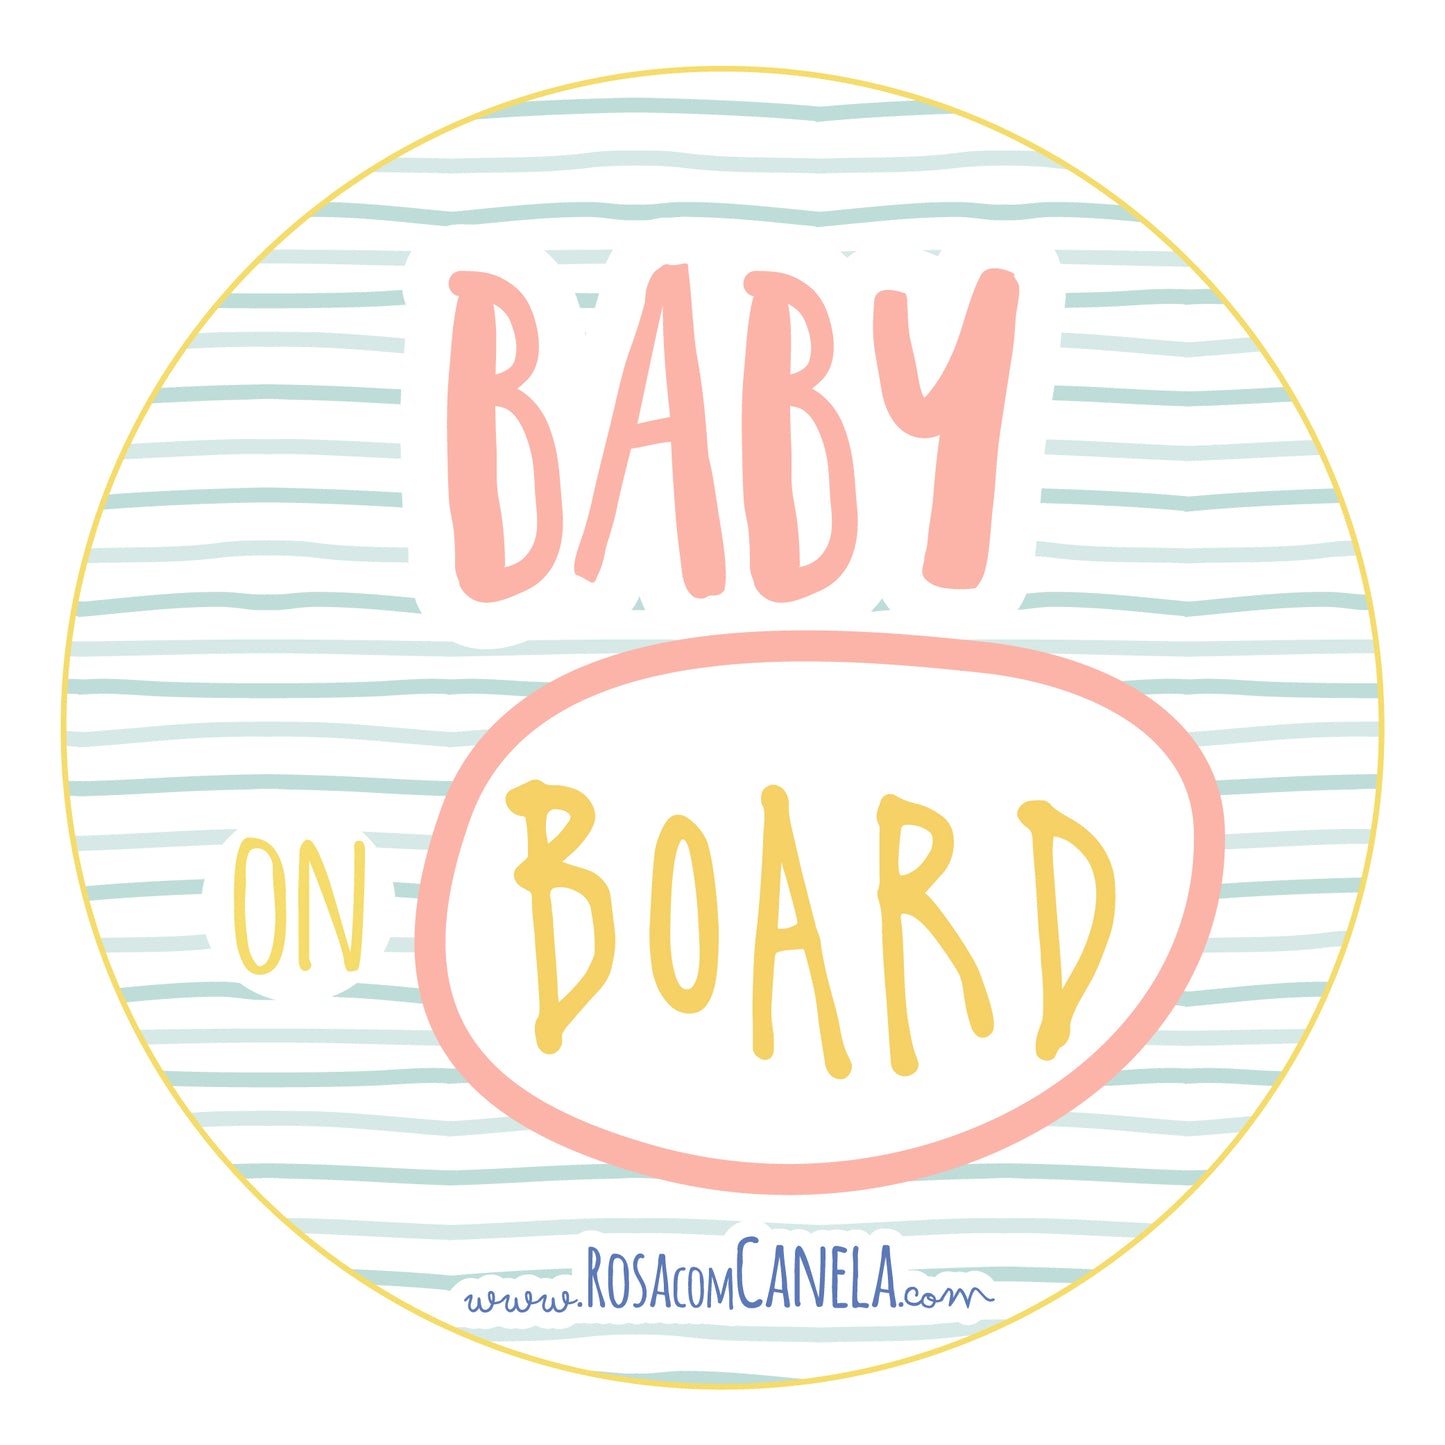 Baby on Board Mint Pink